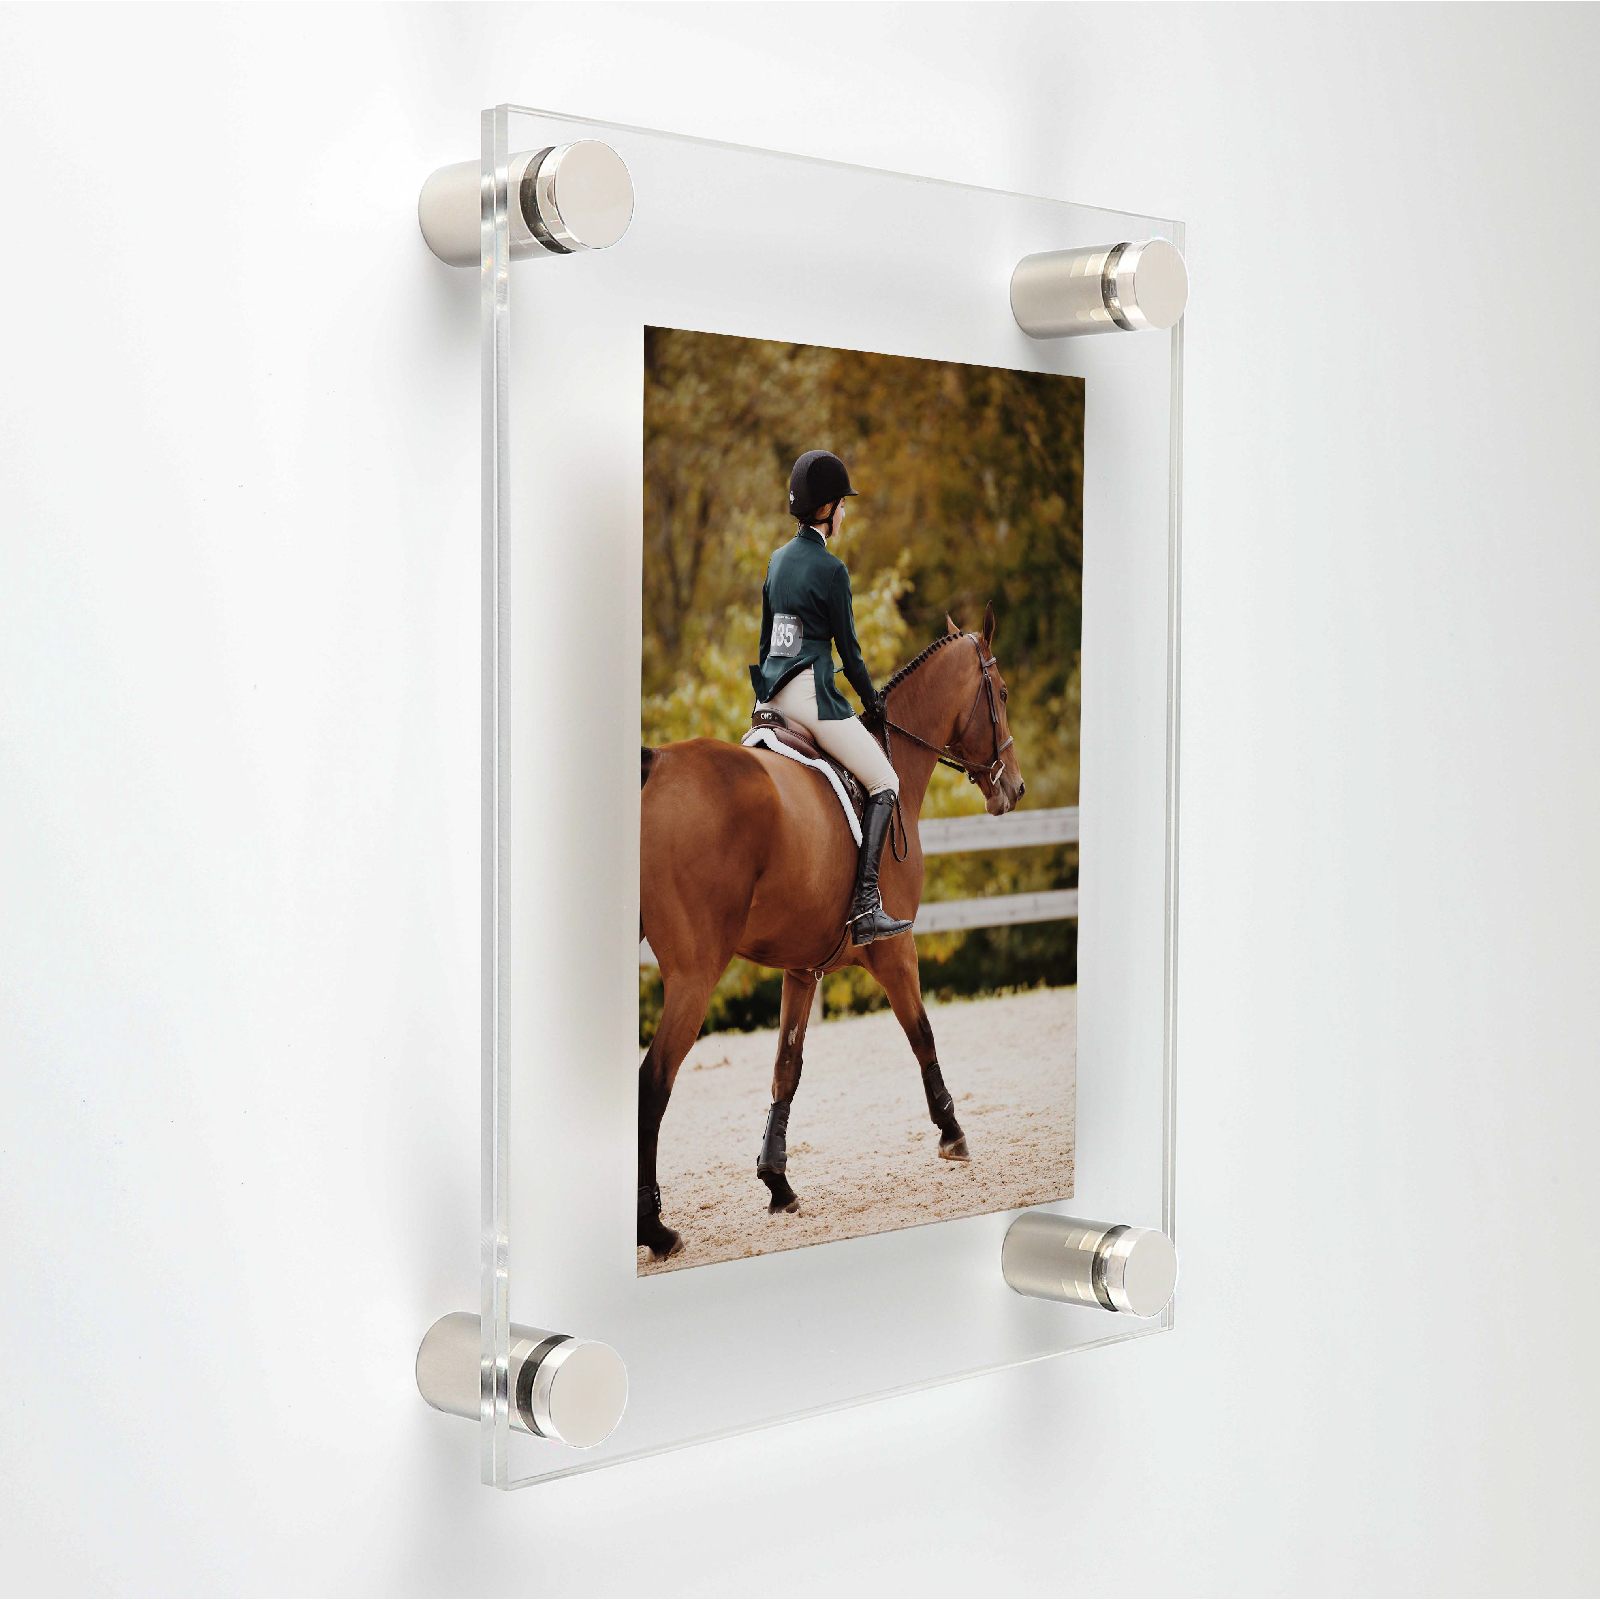 (2) 19-3/4'' x 26'' Clear Acrylics , Pre-Drilled With Polished Edges (Thick 3/16'' each), Wall Frame with (4) 3/4'' x 1'' Polished Stainless Steel Standoffs includes Screws and Anchors